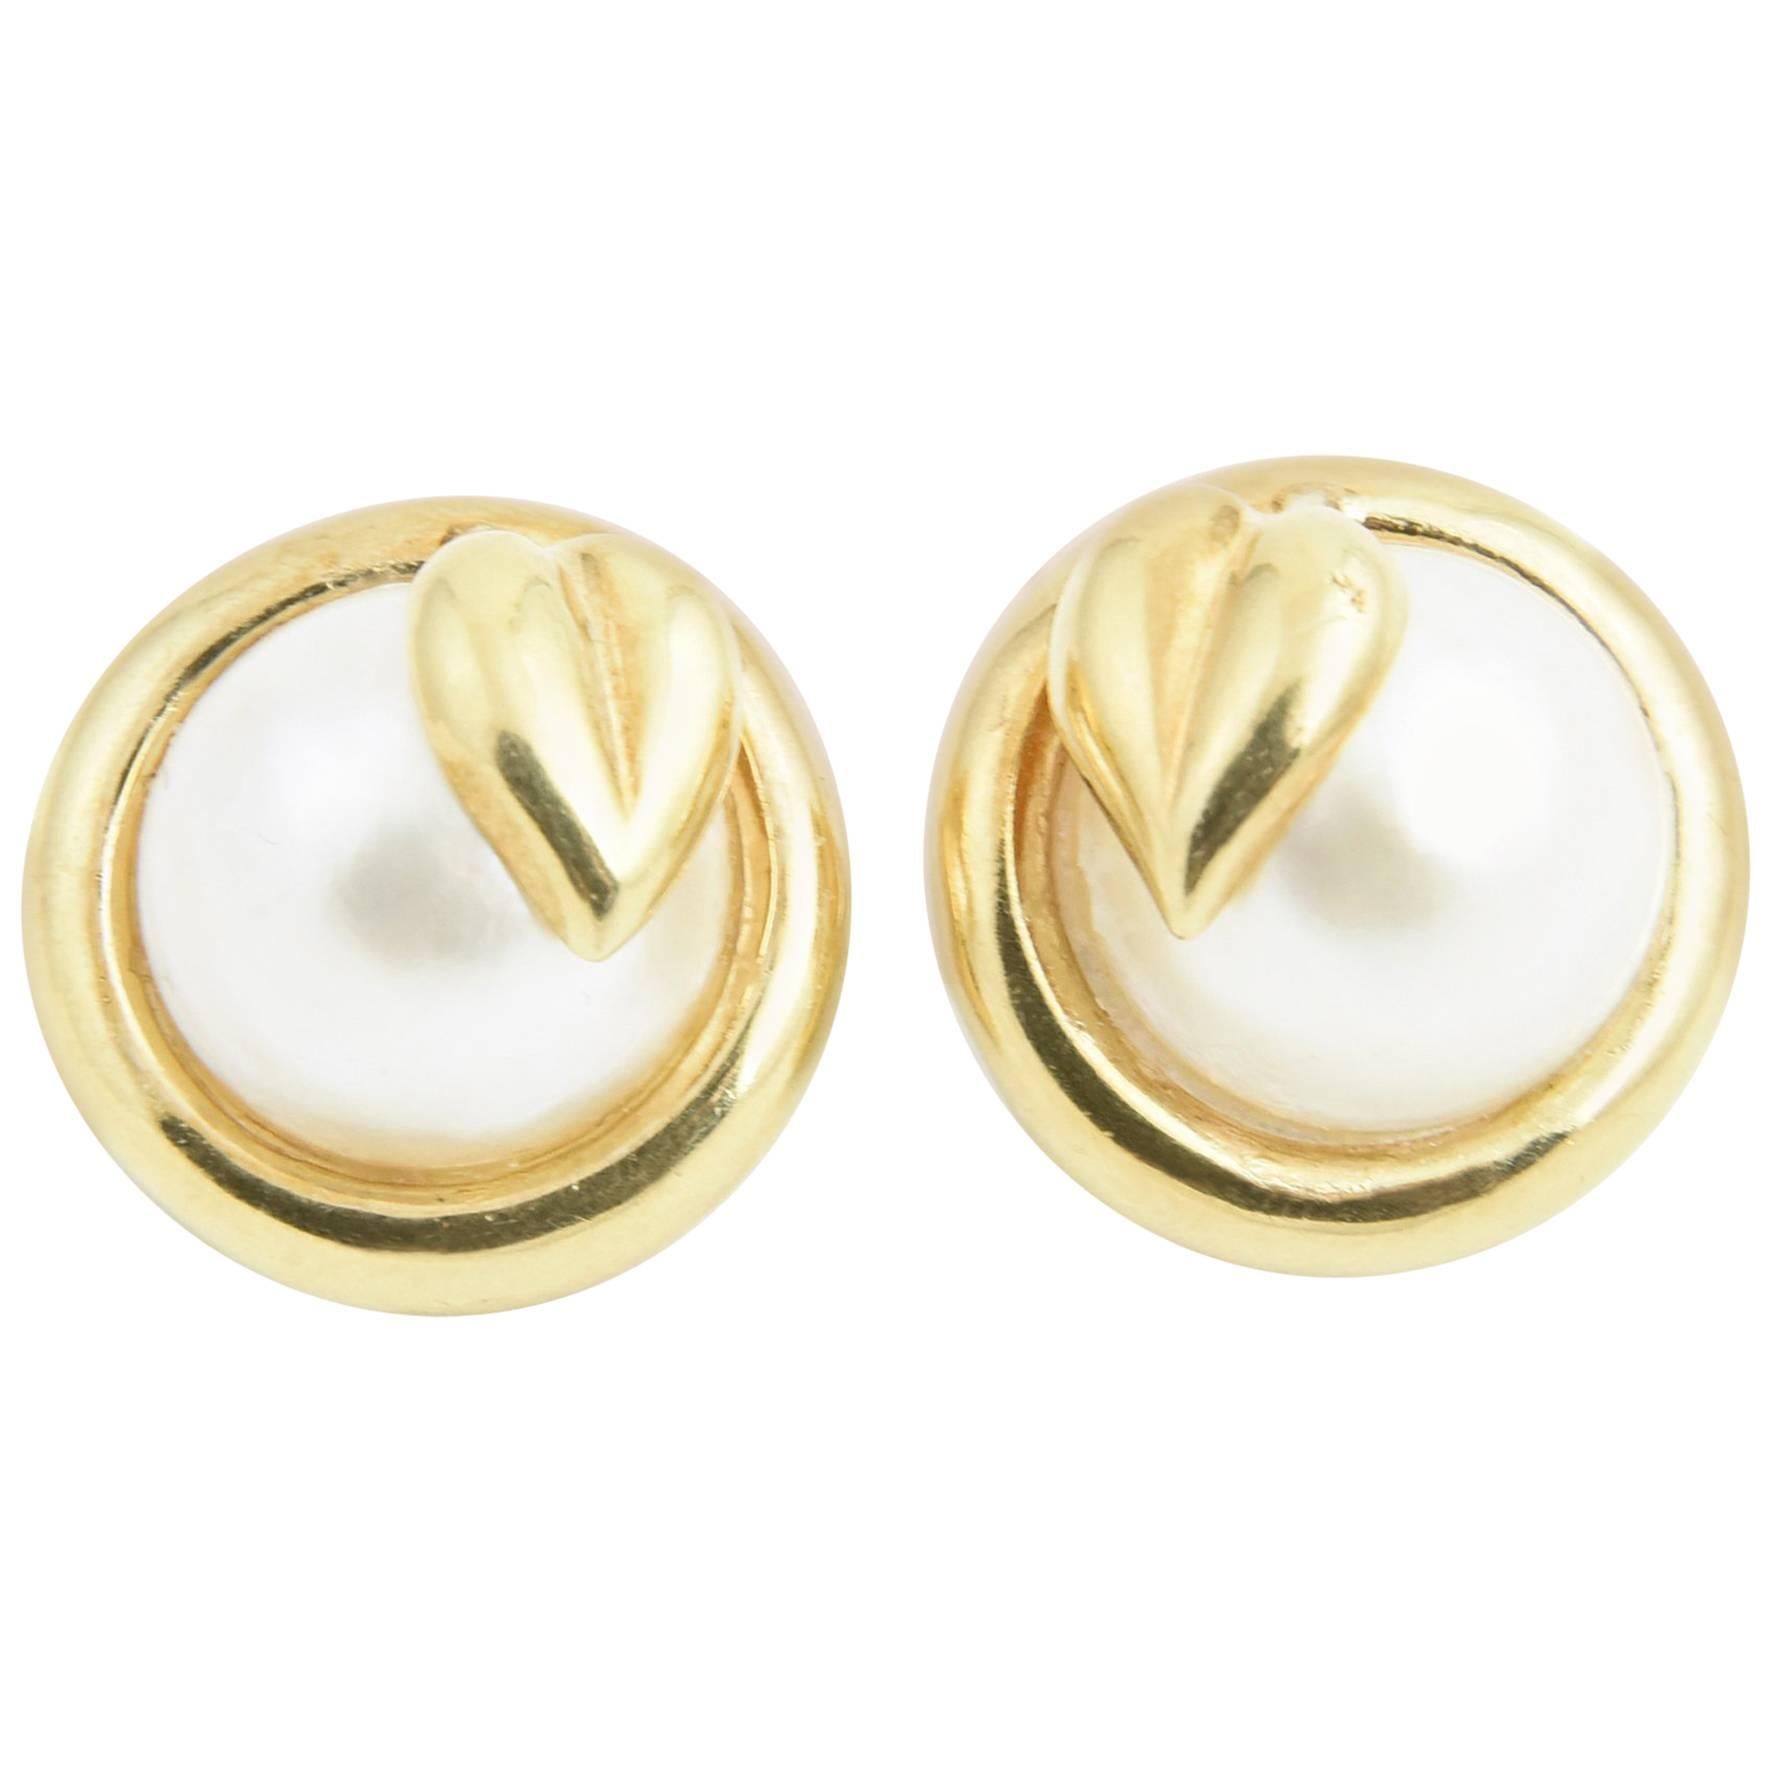 Gold Leaf and Mabe Blister Pearl Button Earrings